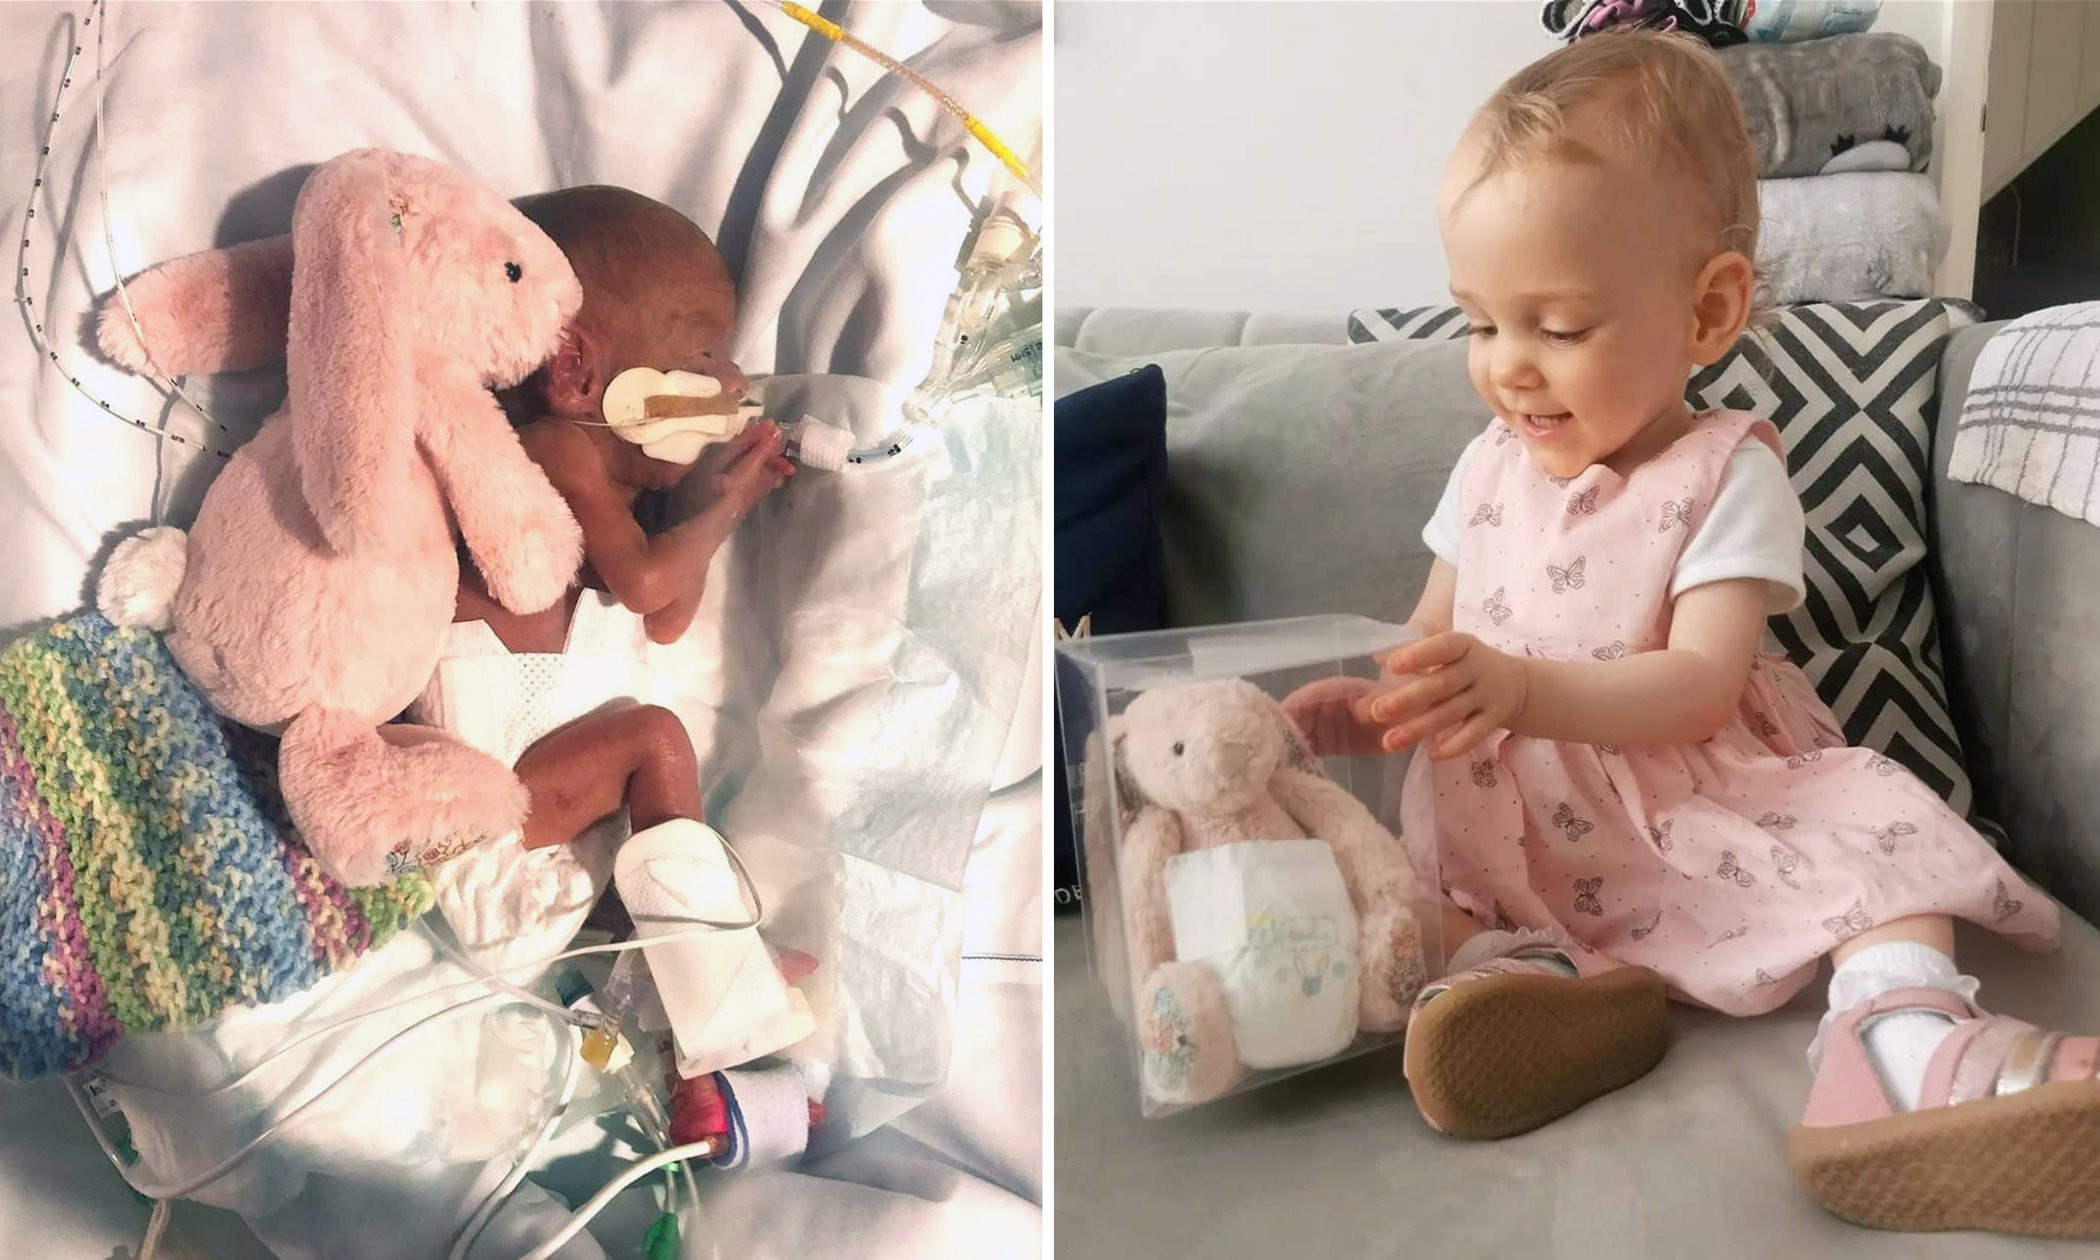 Baby Born 16 Weeks Premature With 10 Percent Survival Odds Is Now a Happy 2-Year-Old